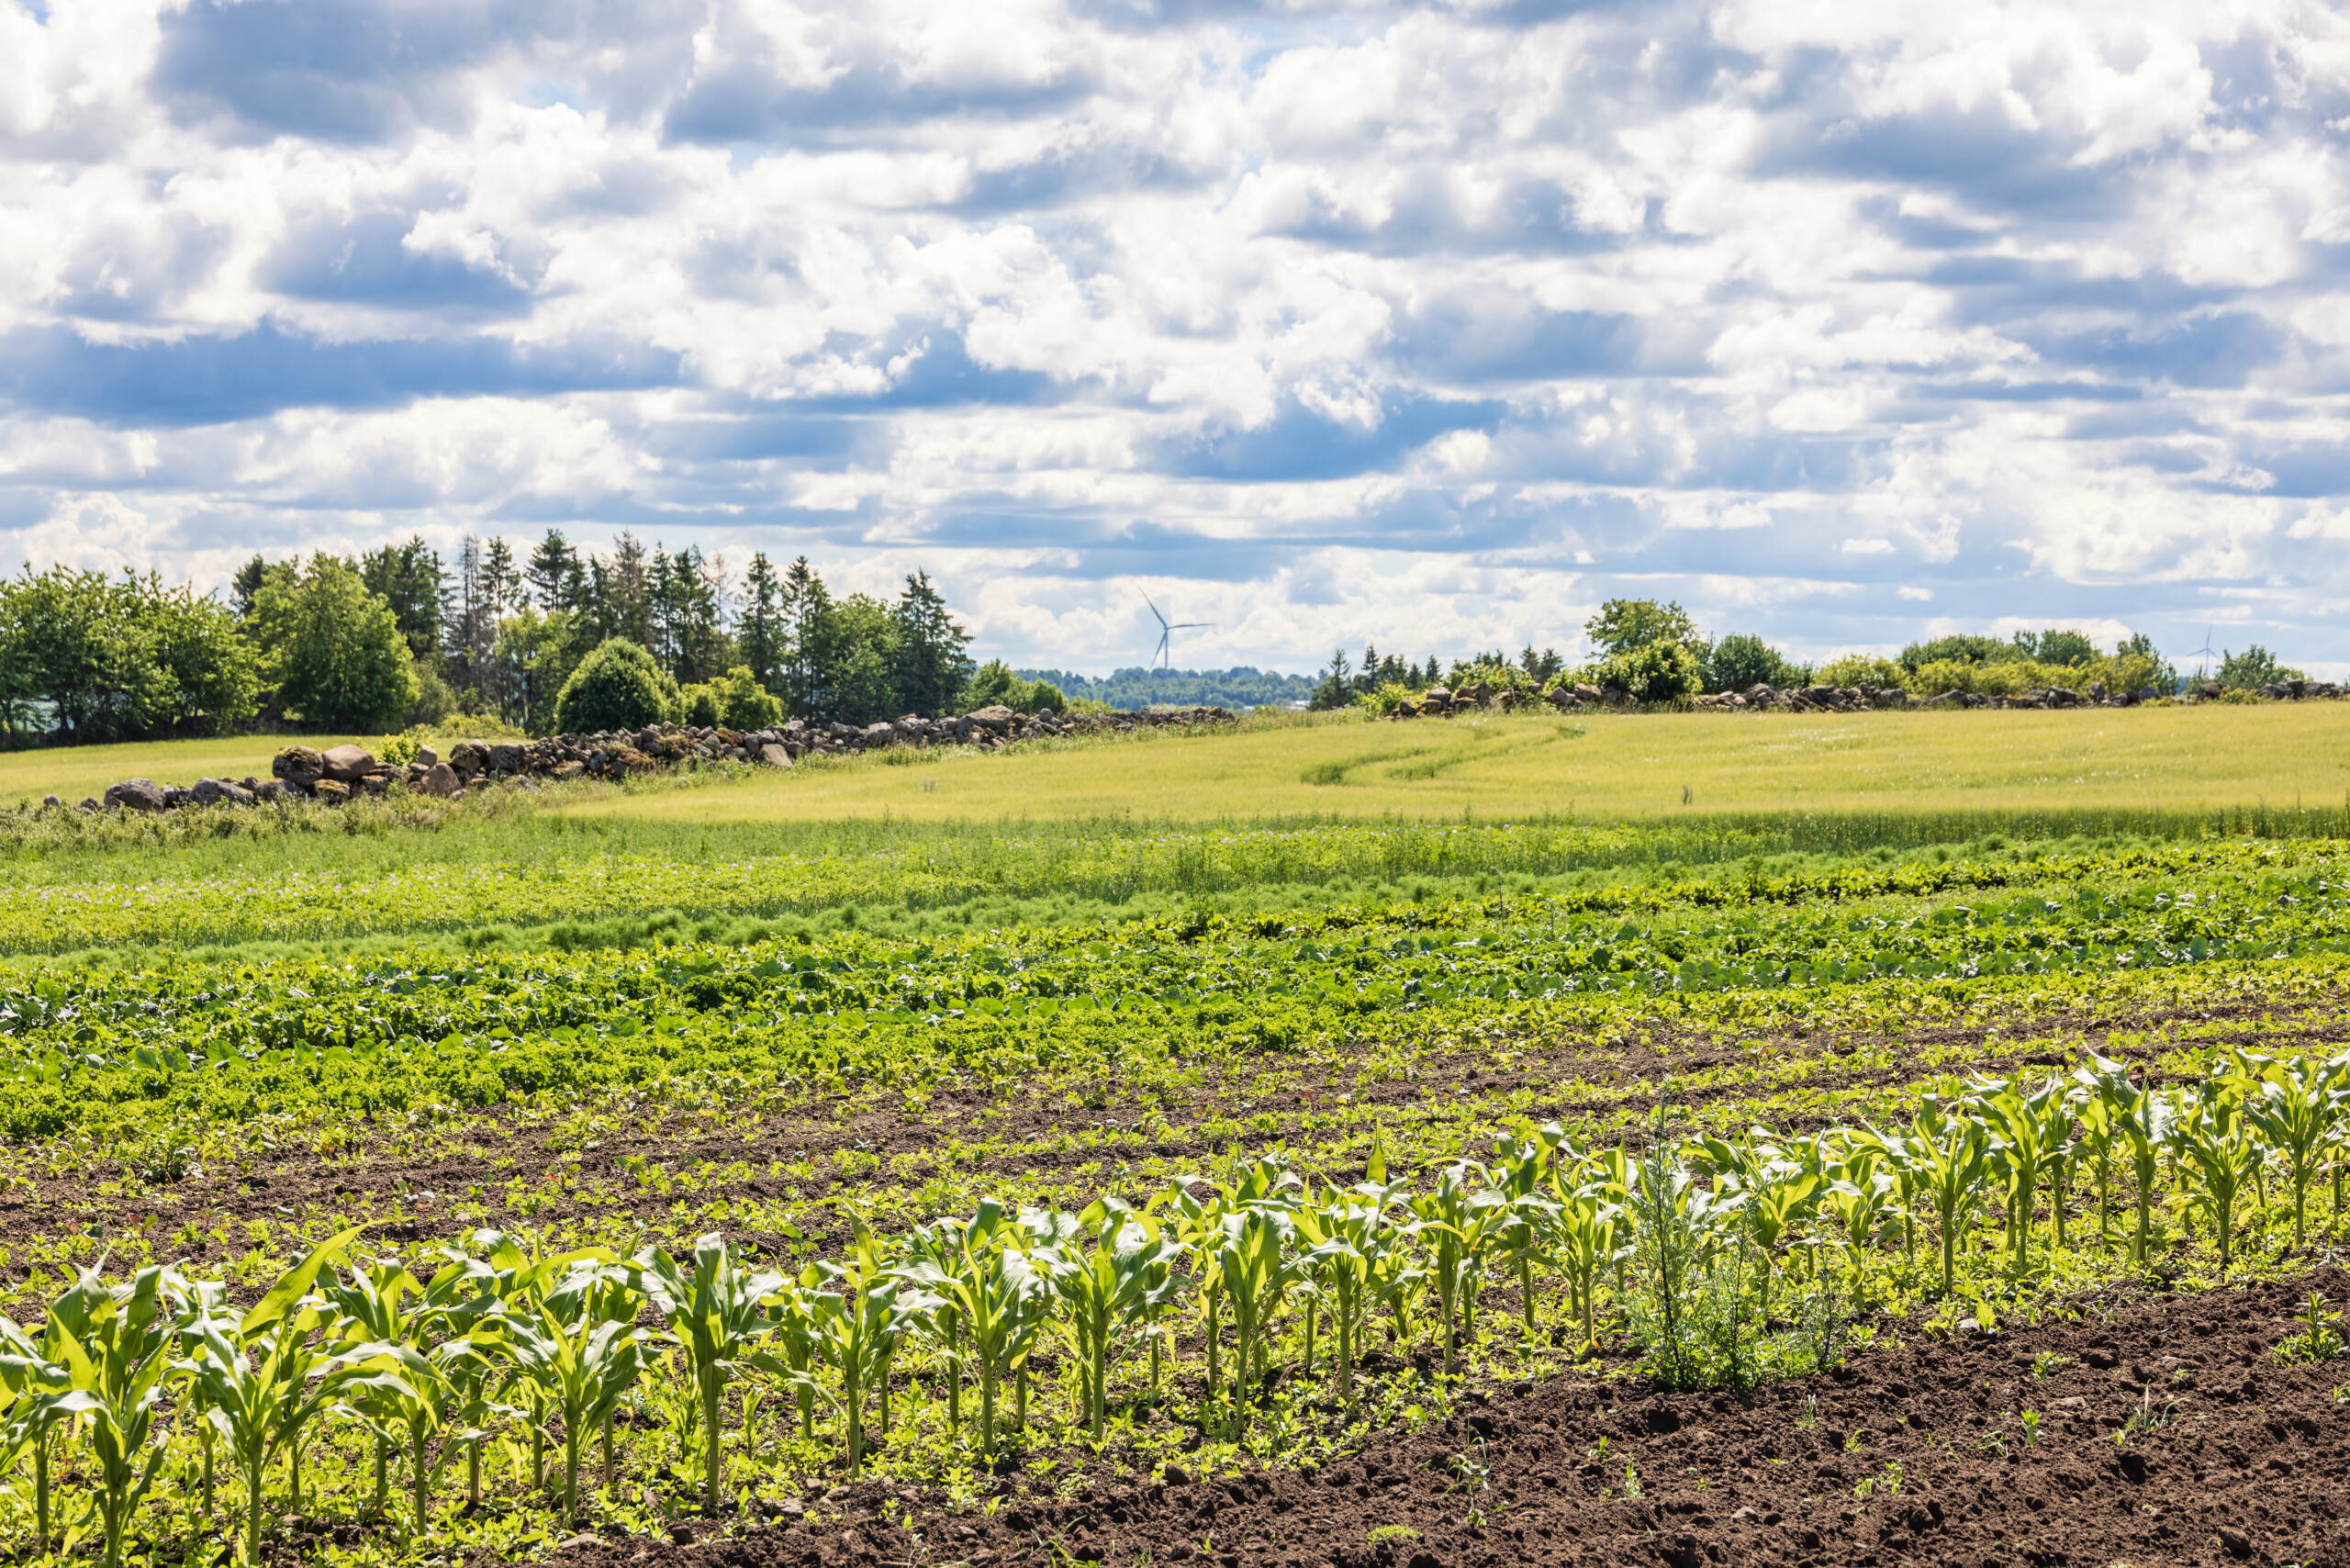 Organic farming can reduce the climate impact of agriculture